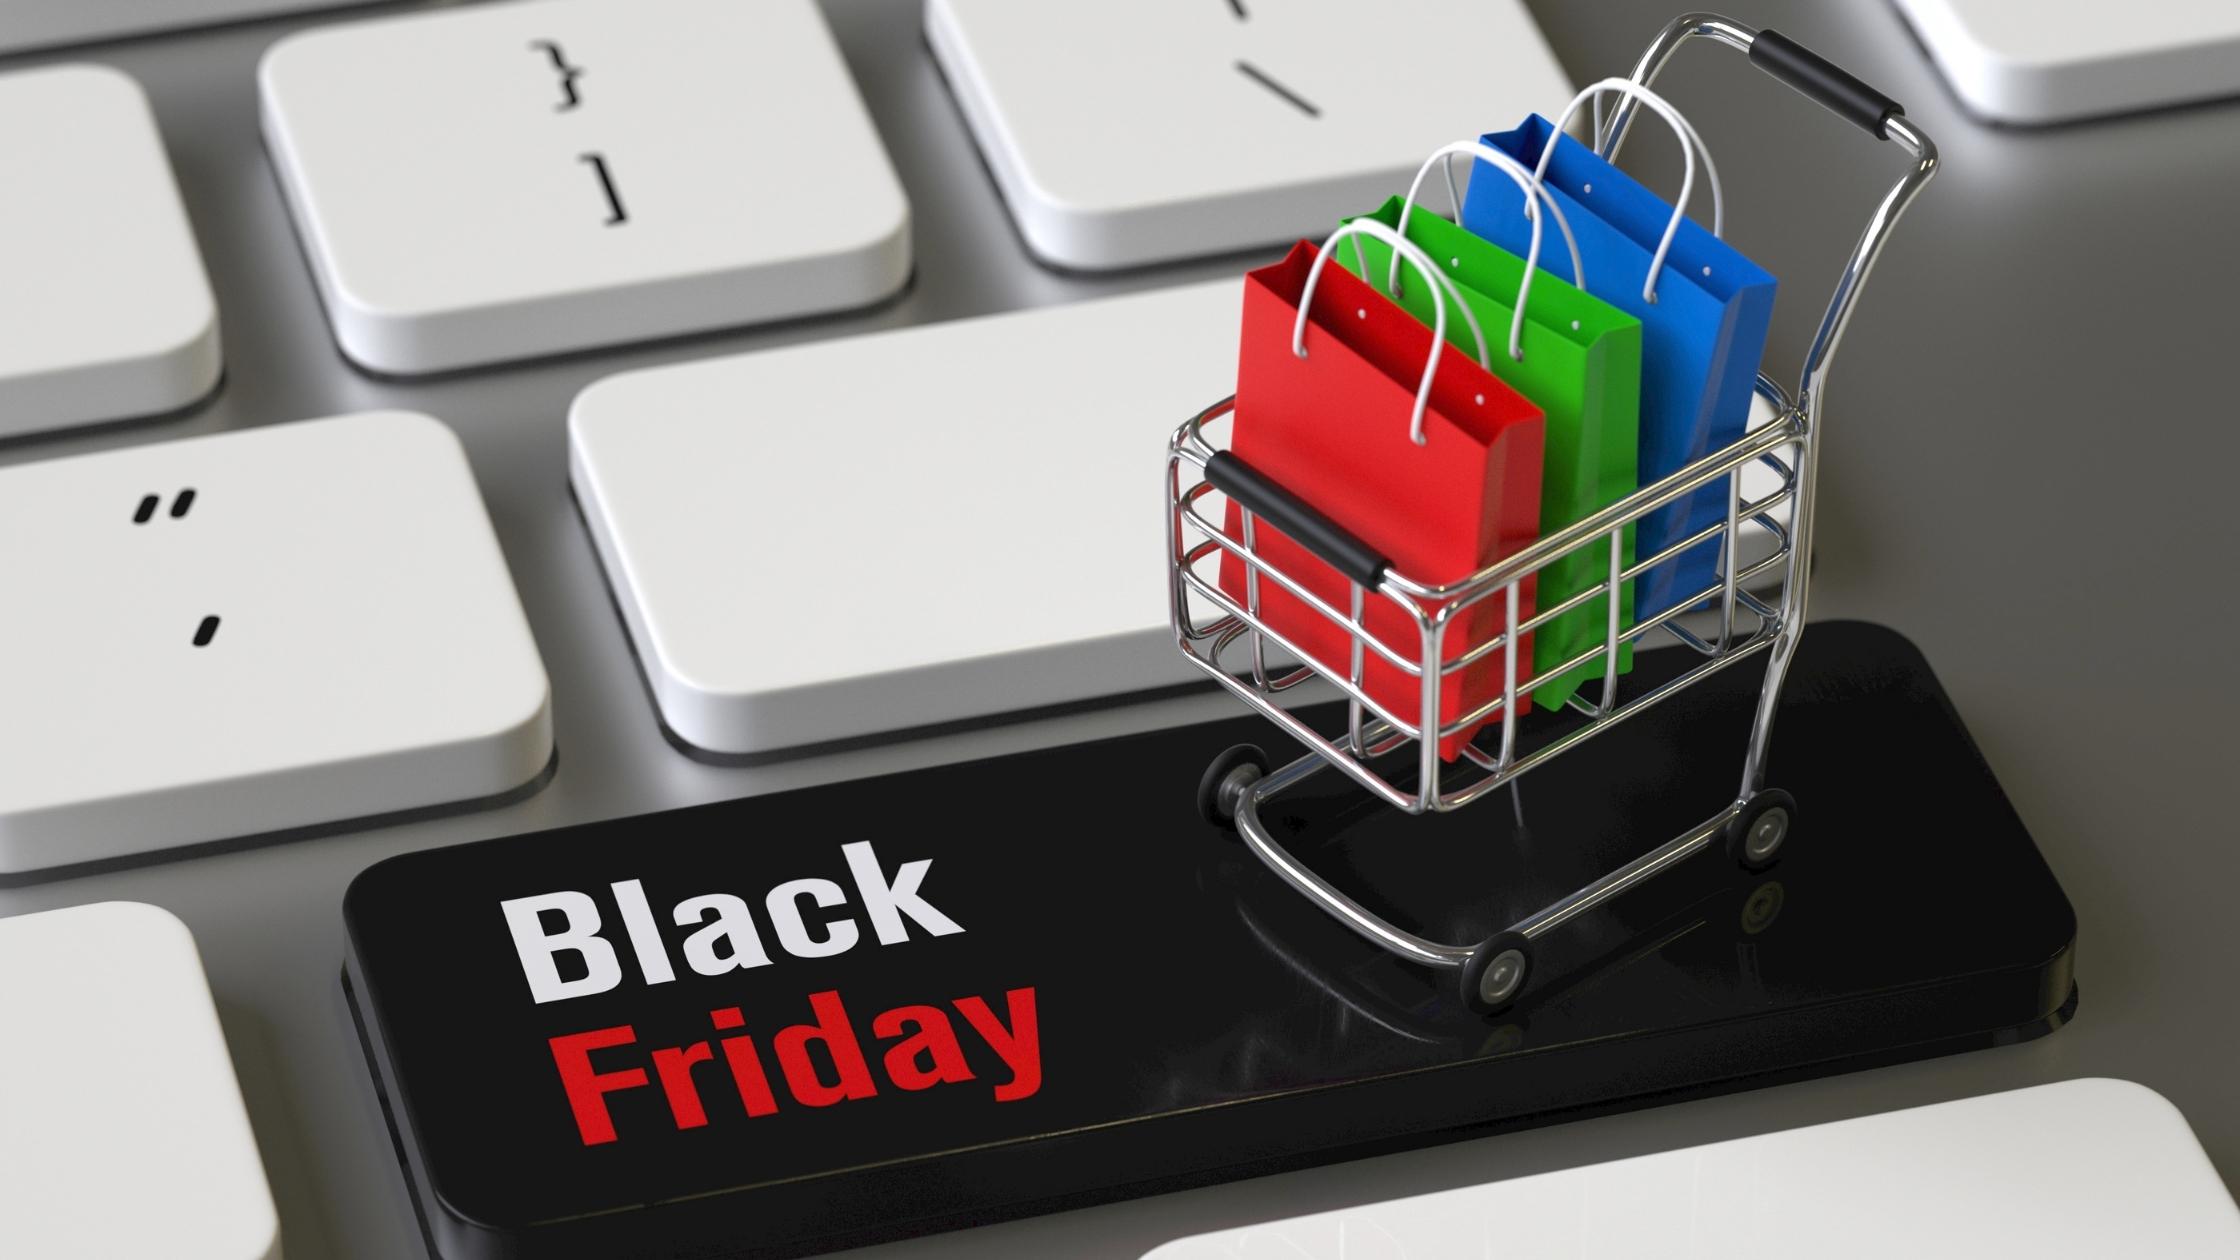 Black Friday and your website